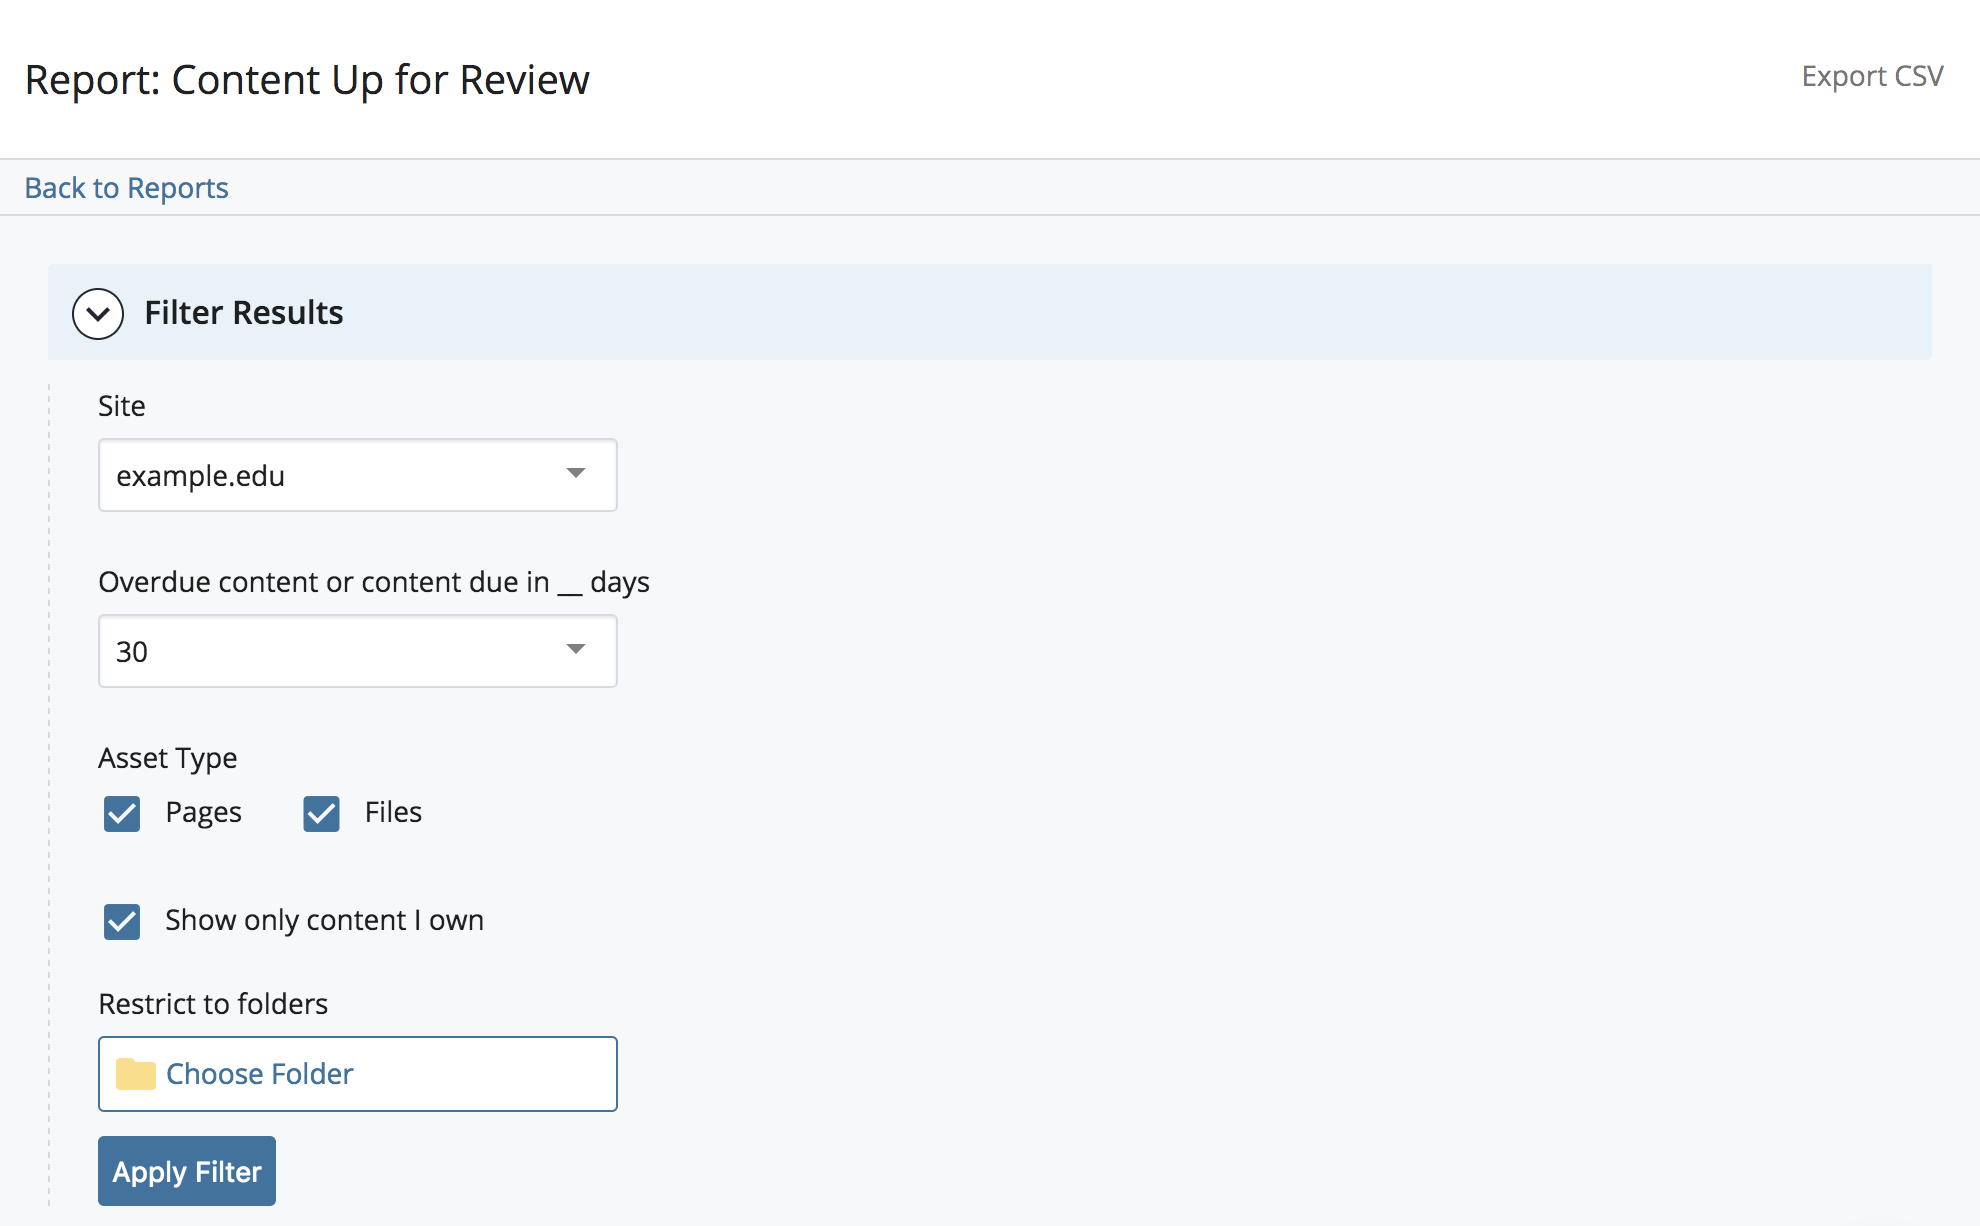 Content Up for Review Report Filters